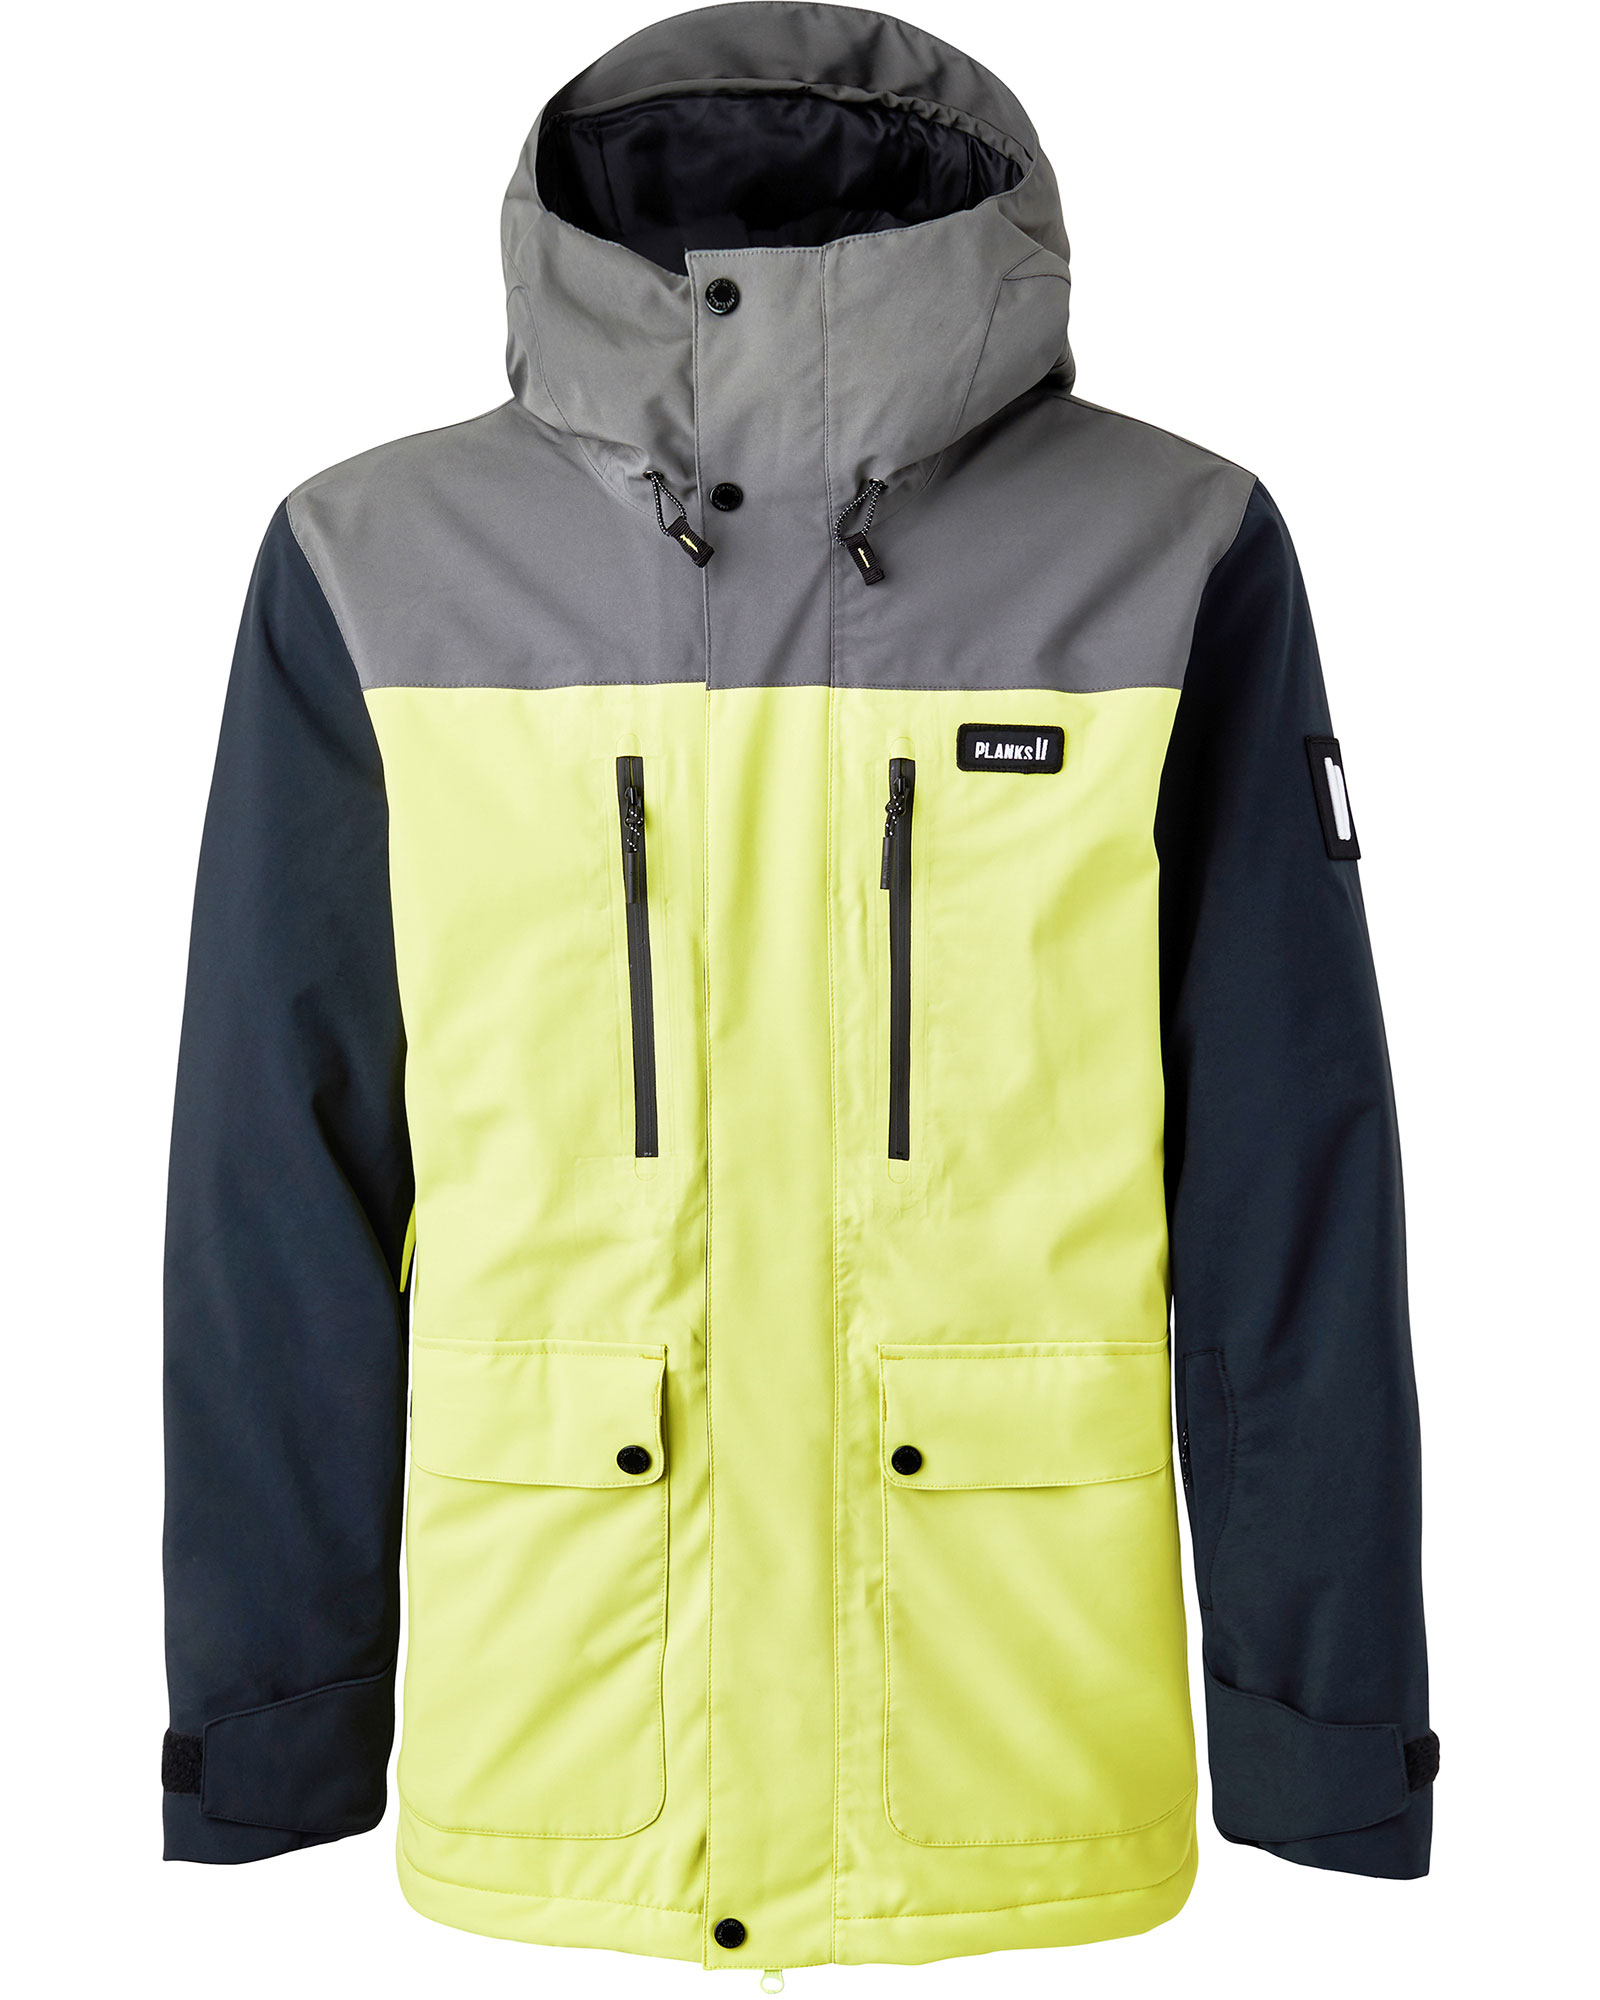 Planks Good Times Men’s Insulated Jacket - Fluro Lime XL